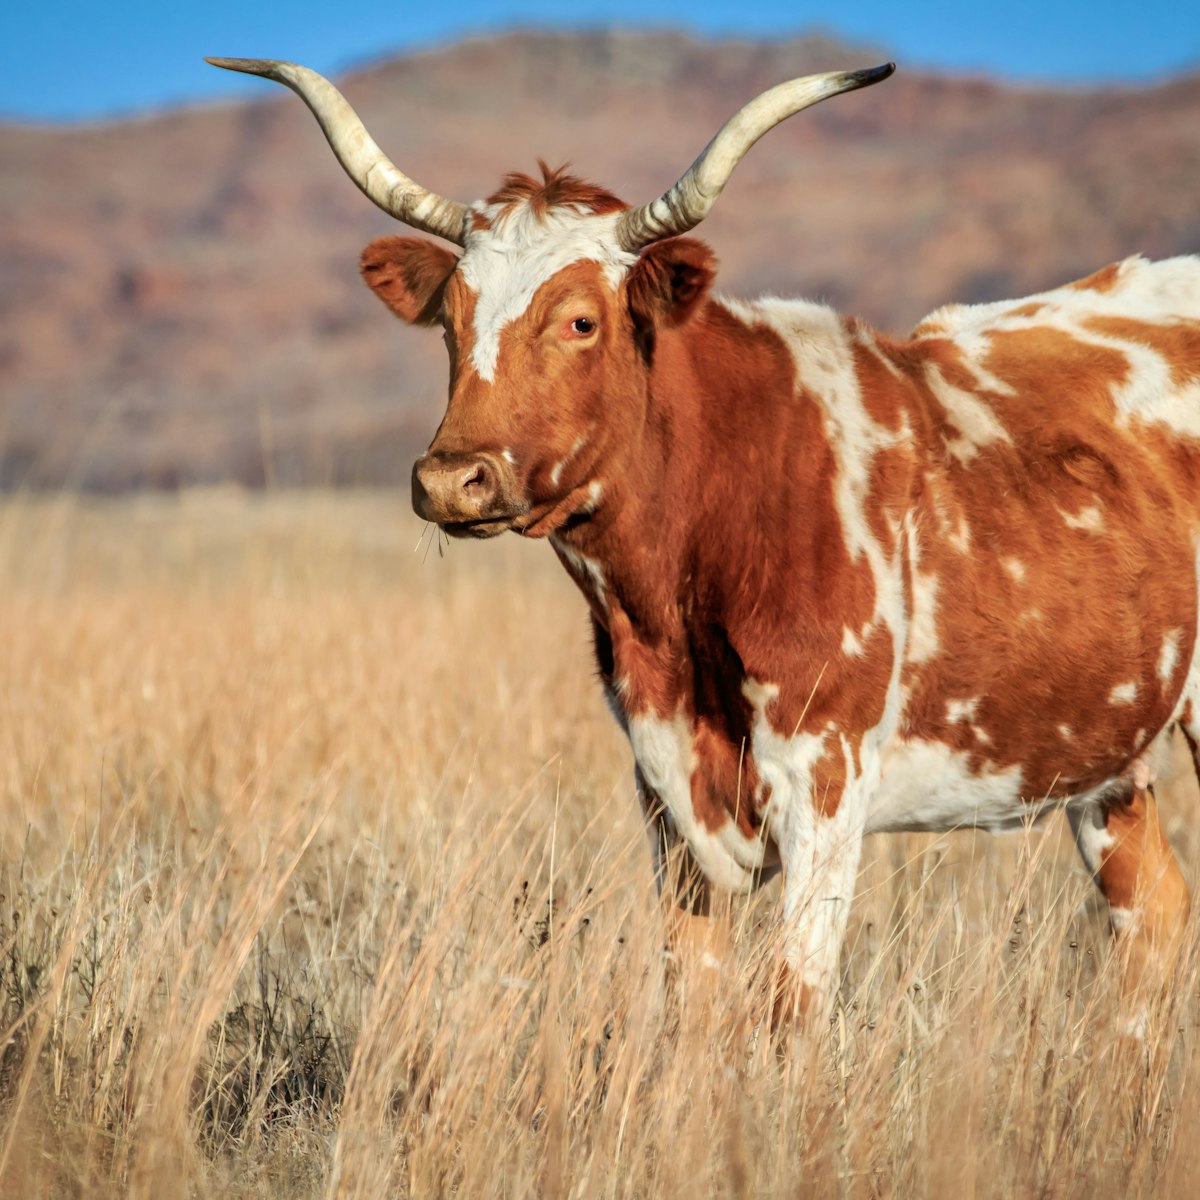 A wild longhorn cow on the prairie in the Wichita Mountains Wildlife Refuge.
